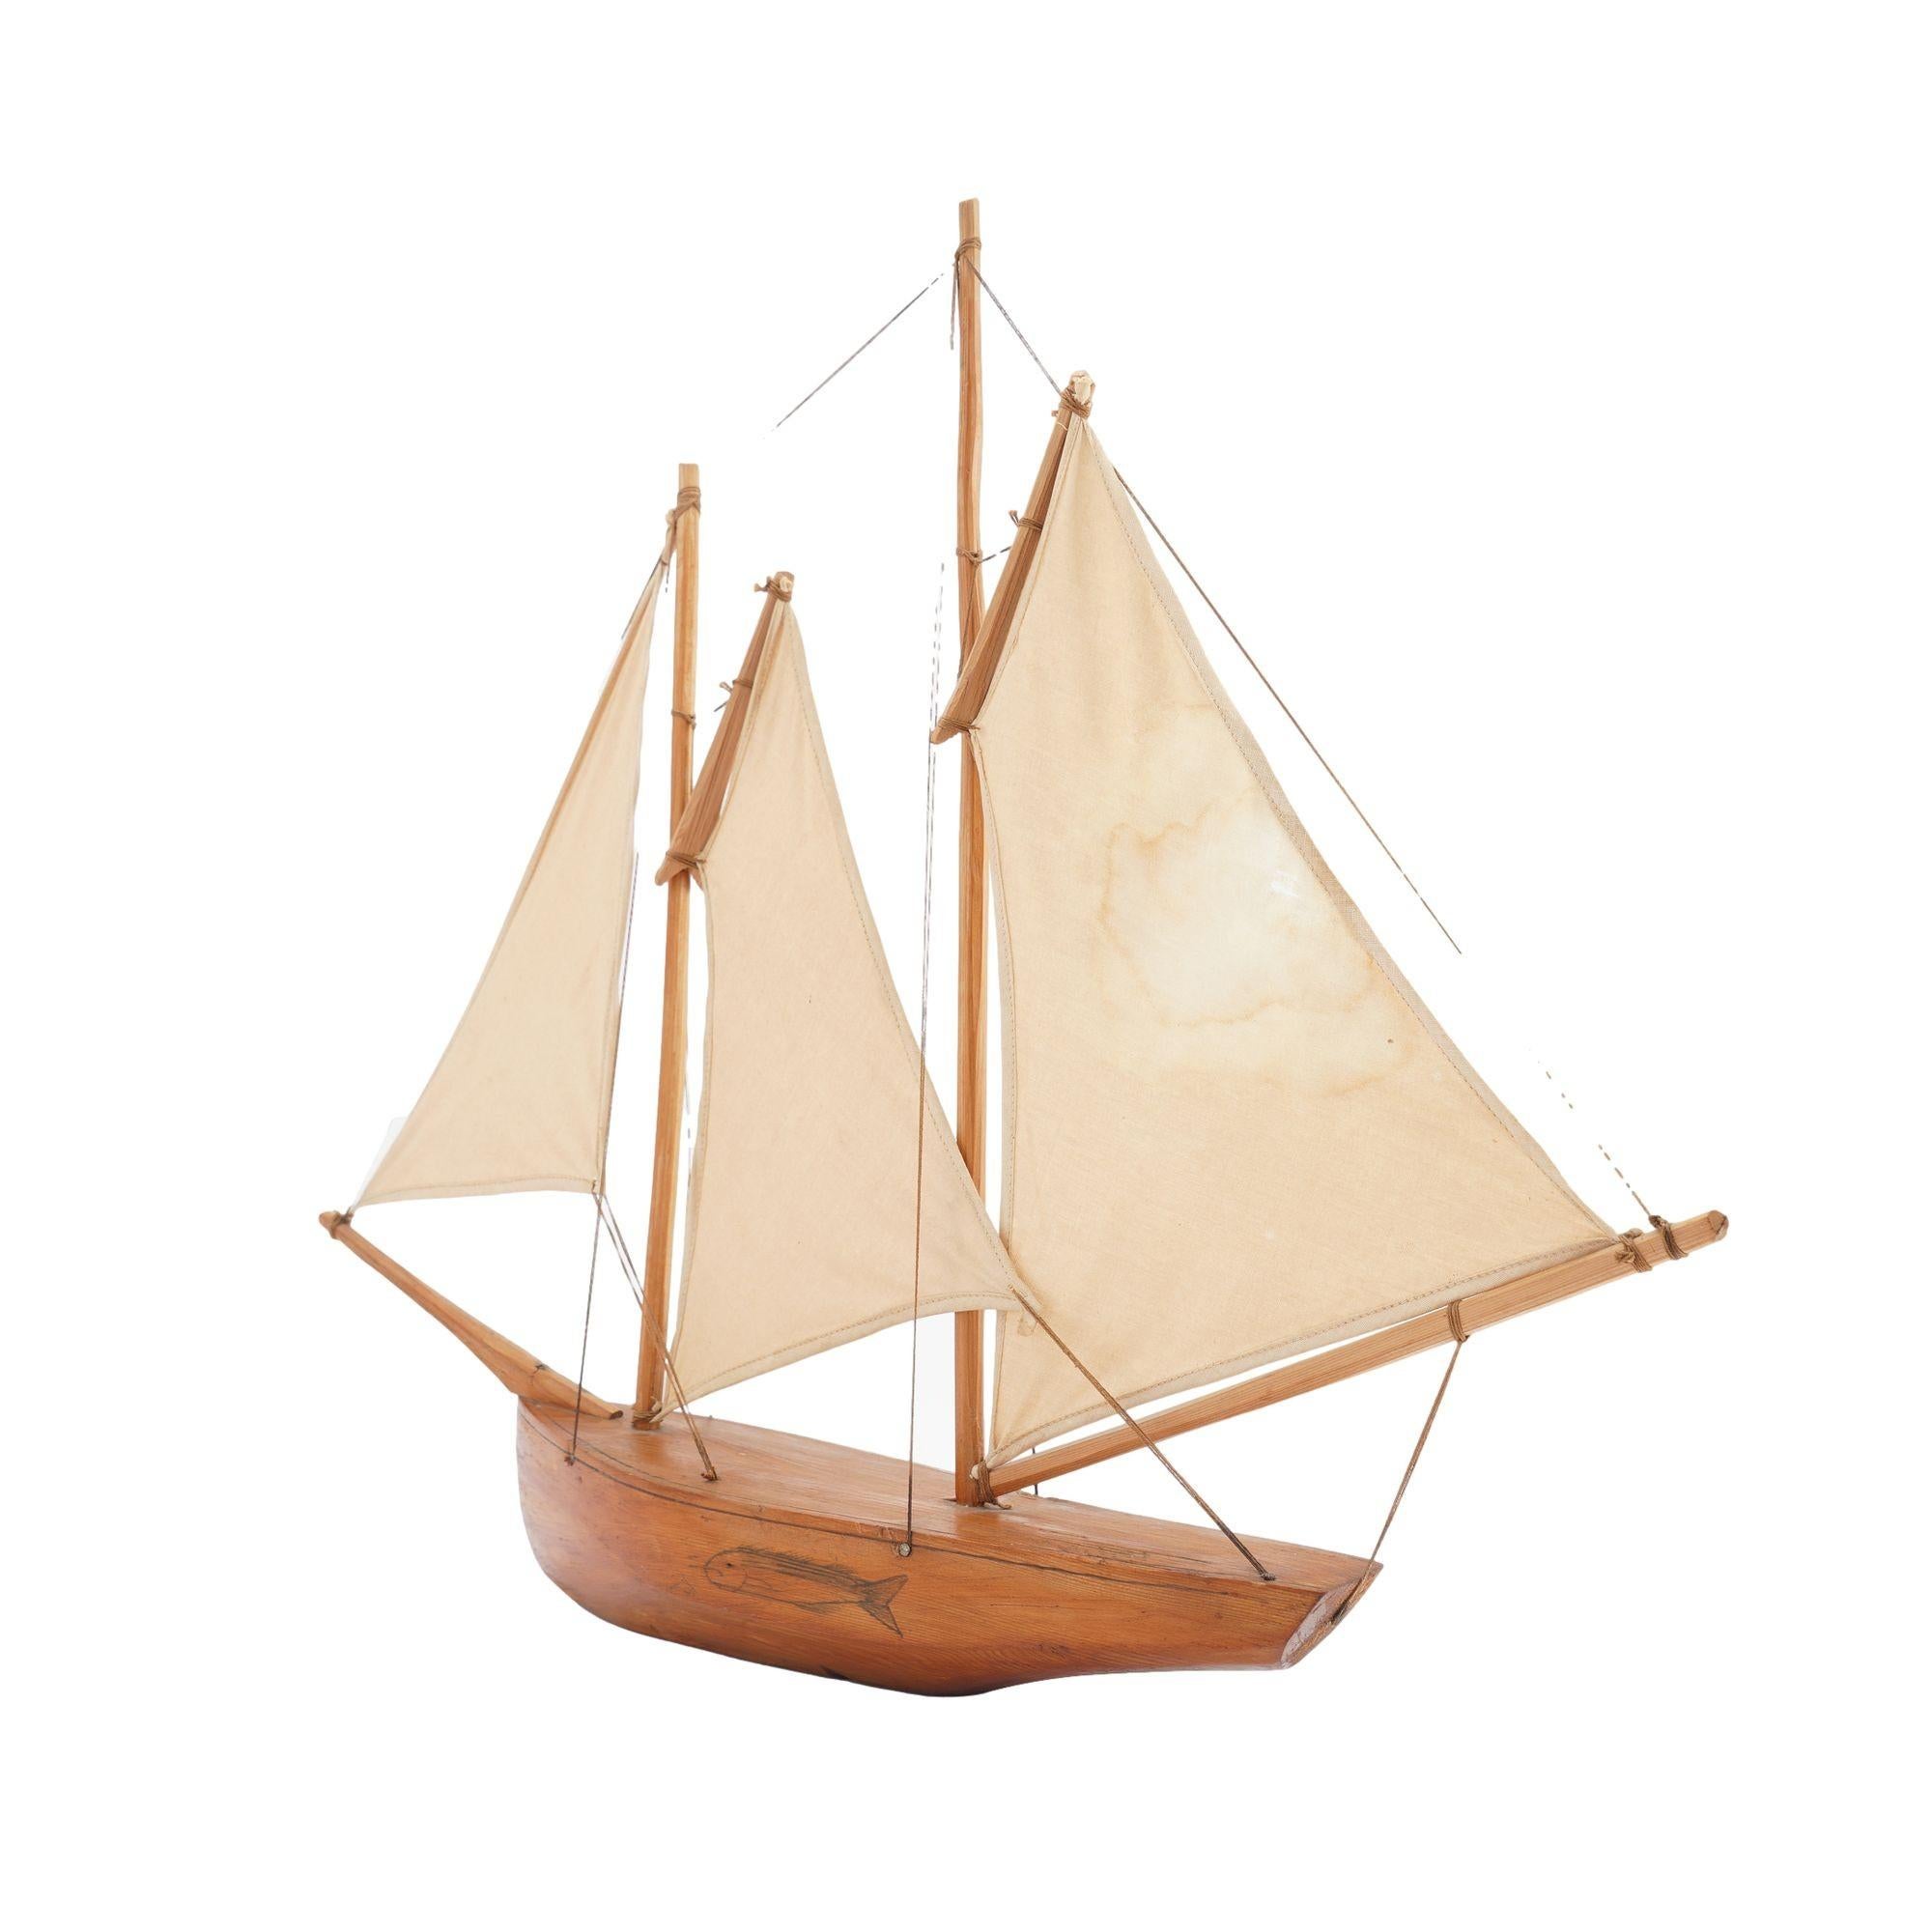 Northern white pine carved model of a New England double masted fishing catch with cotton sails. An engraving of a fish adorns one side of the hull.
American, early 20th century.